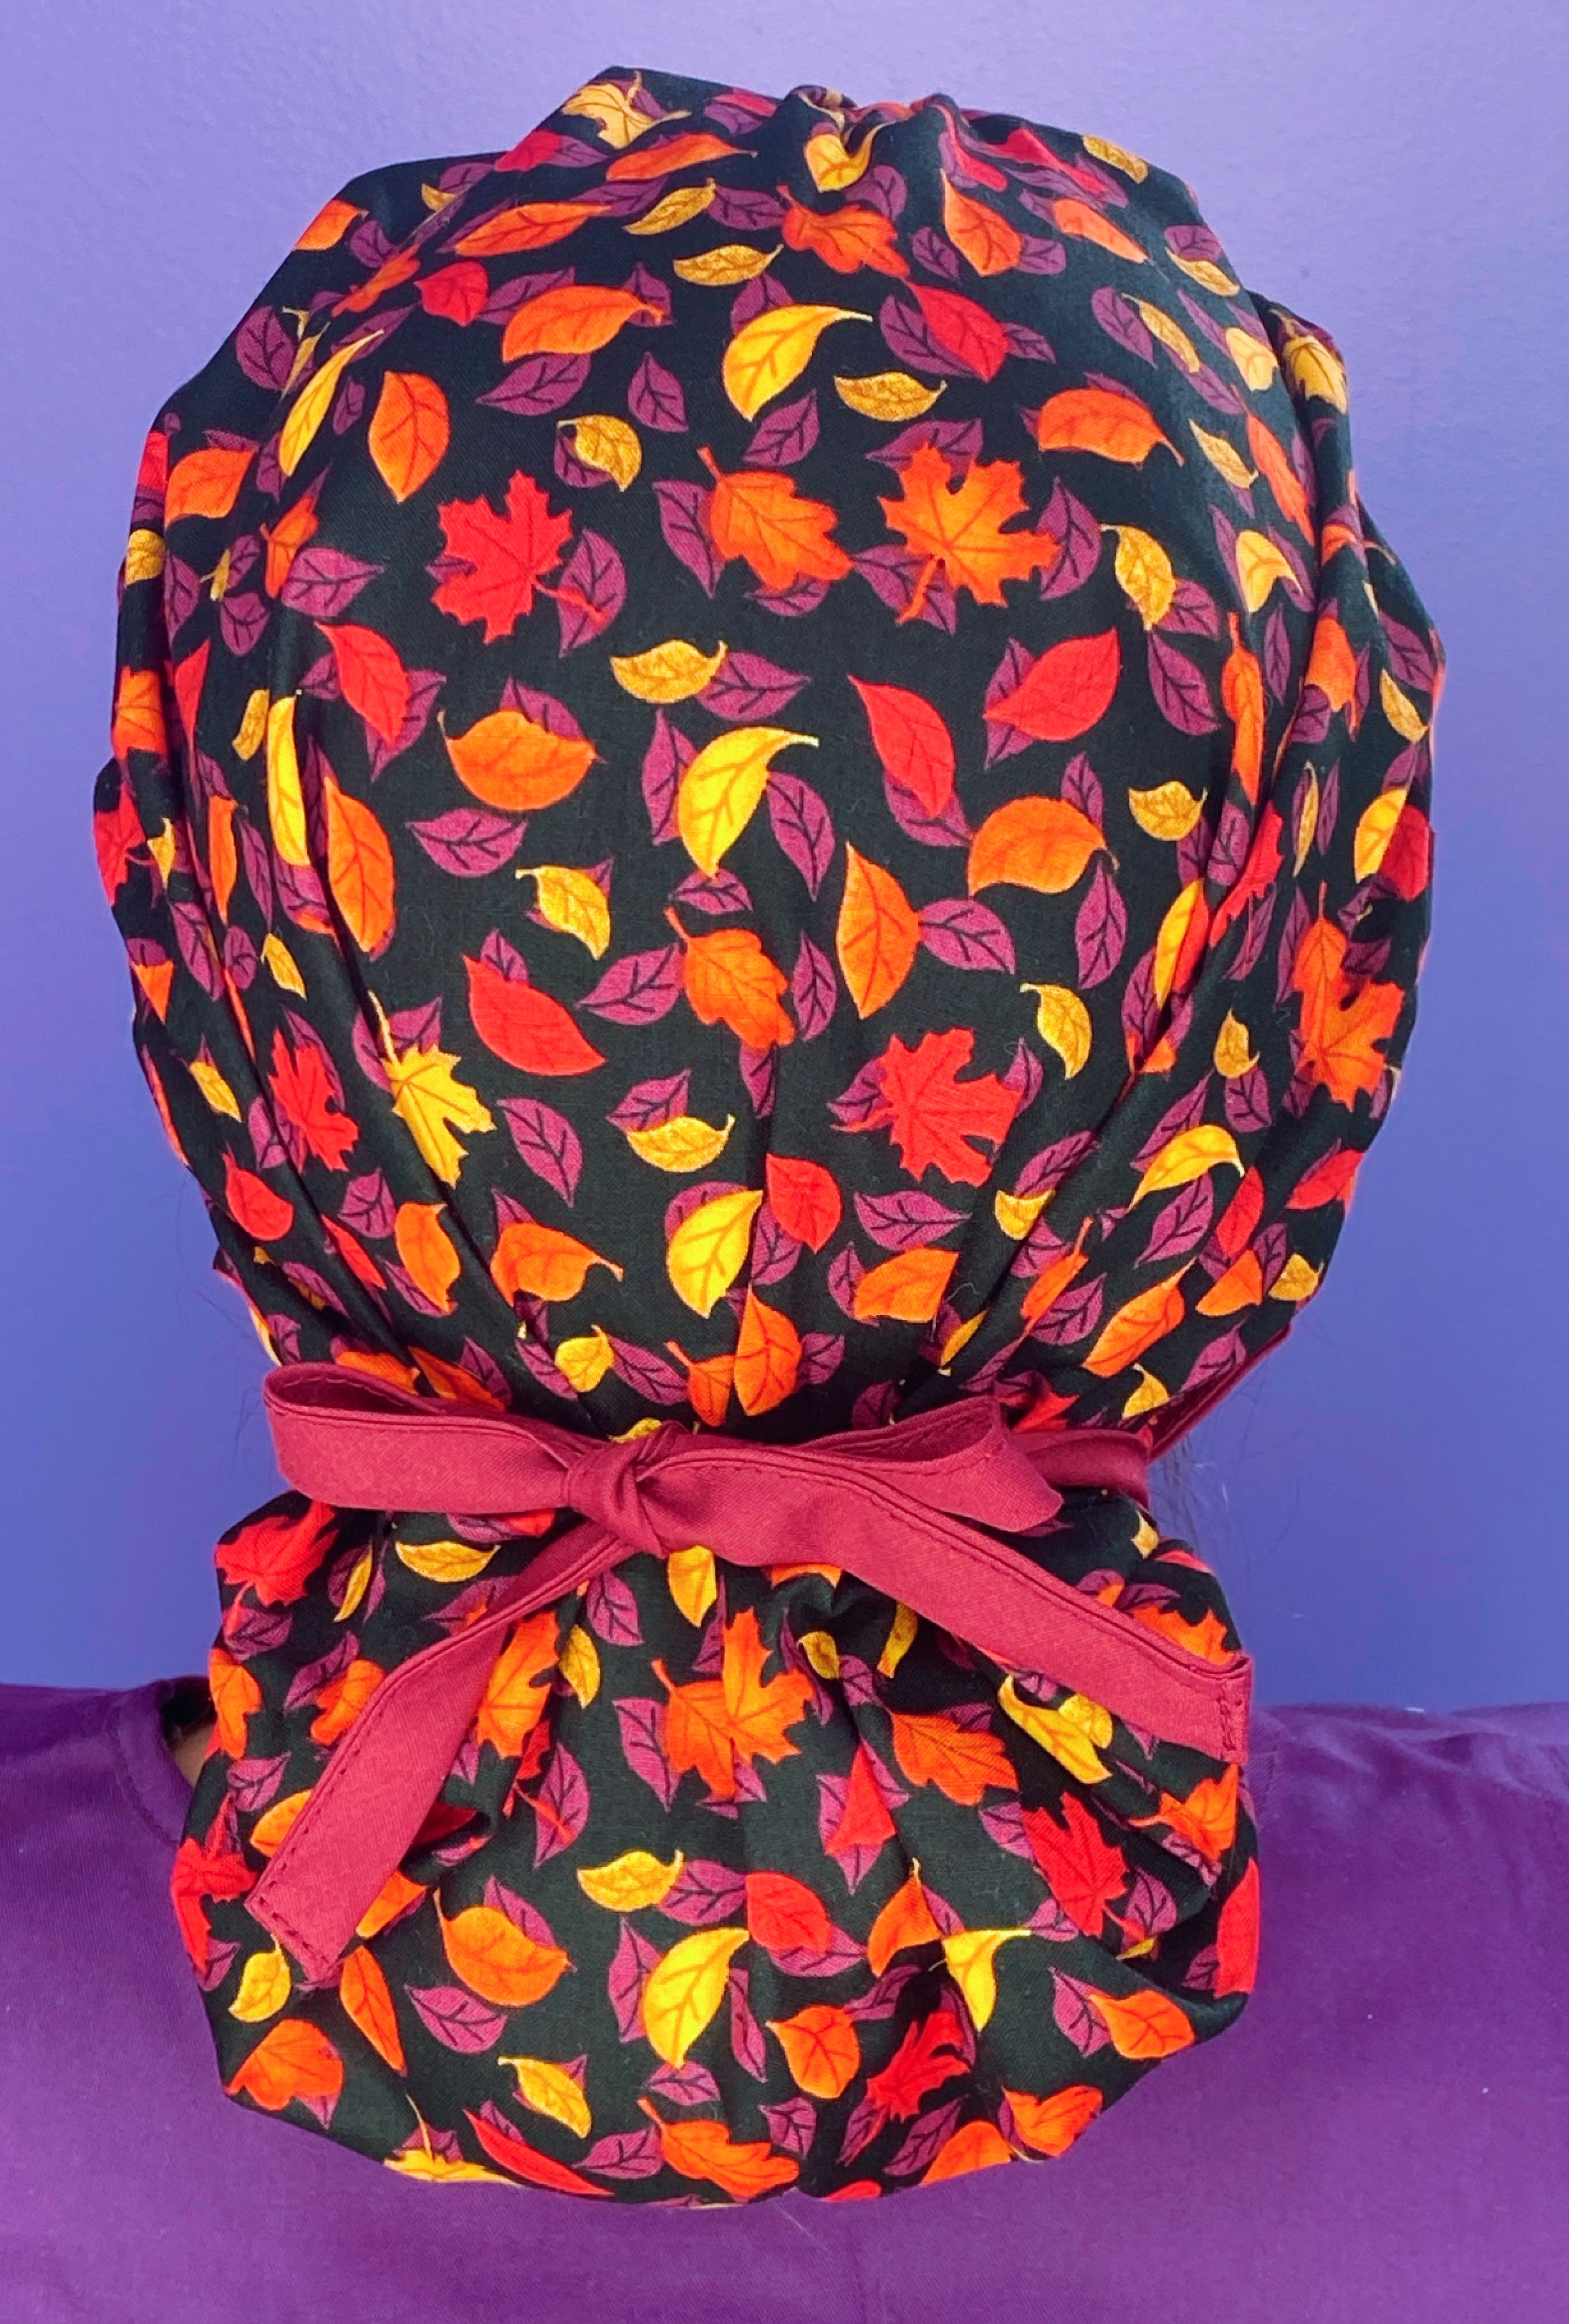 Autumn Leaves Fall Colors Thanksgiving/Fall Holiday Themed Bouffant